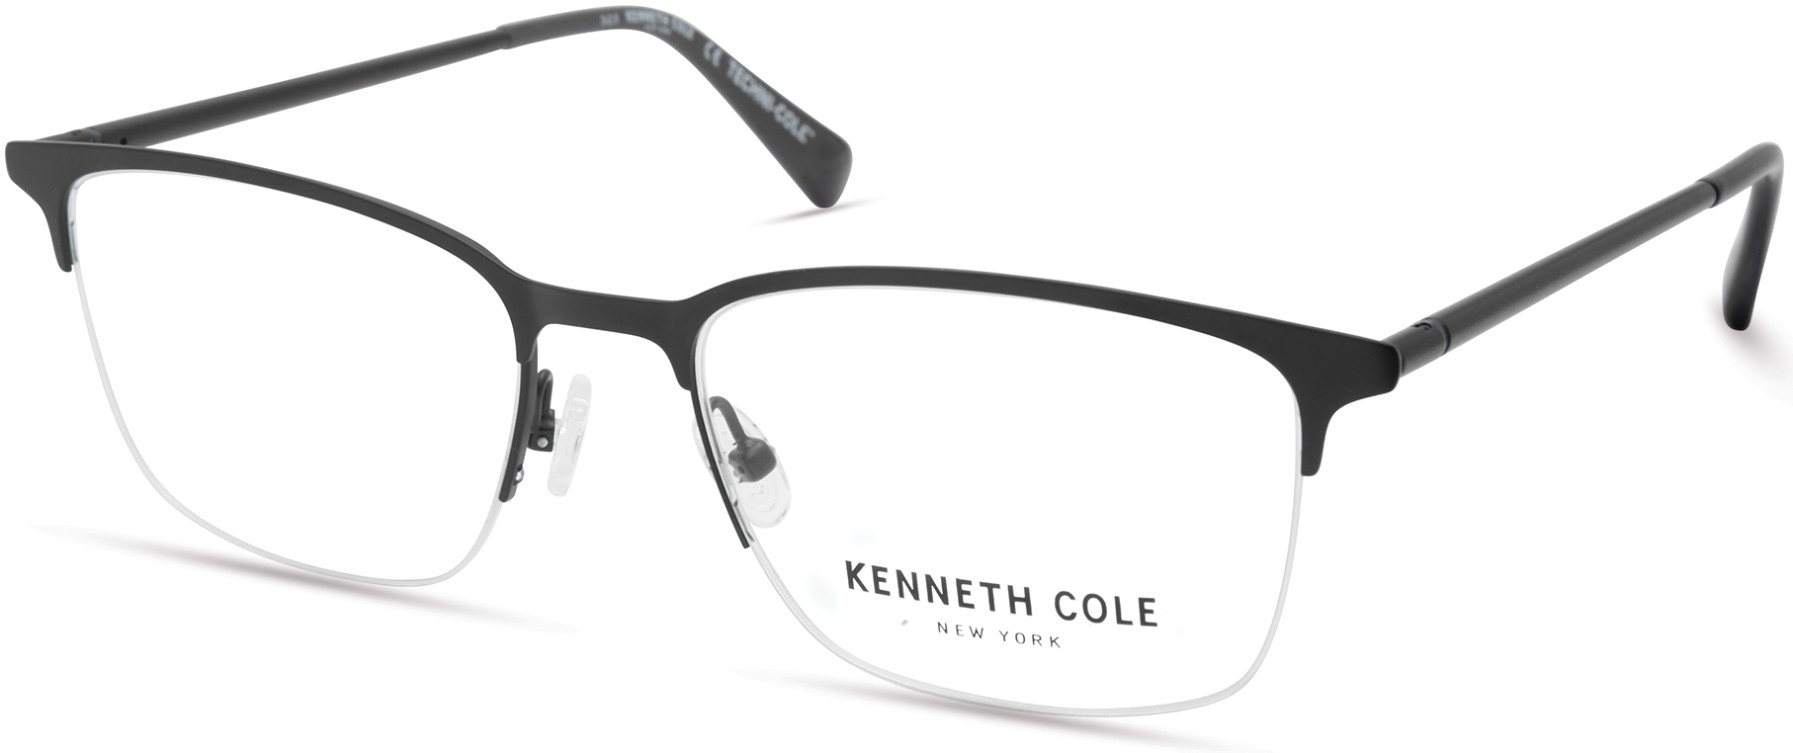 KENNETH COLE NY 0322 002